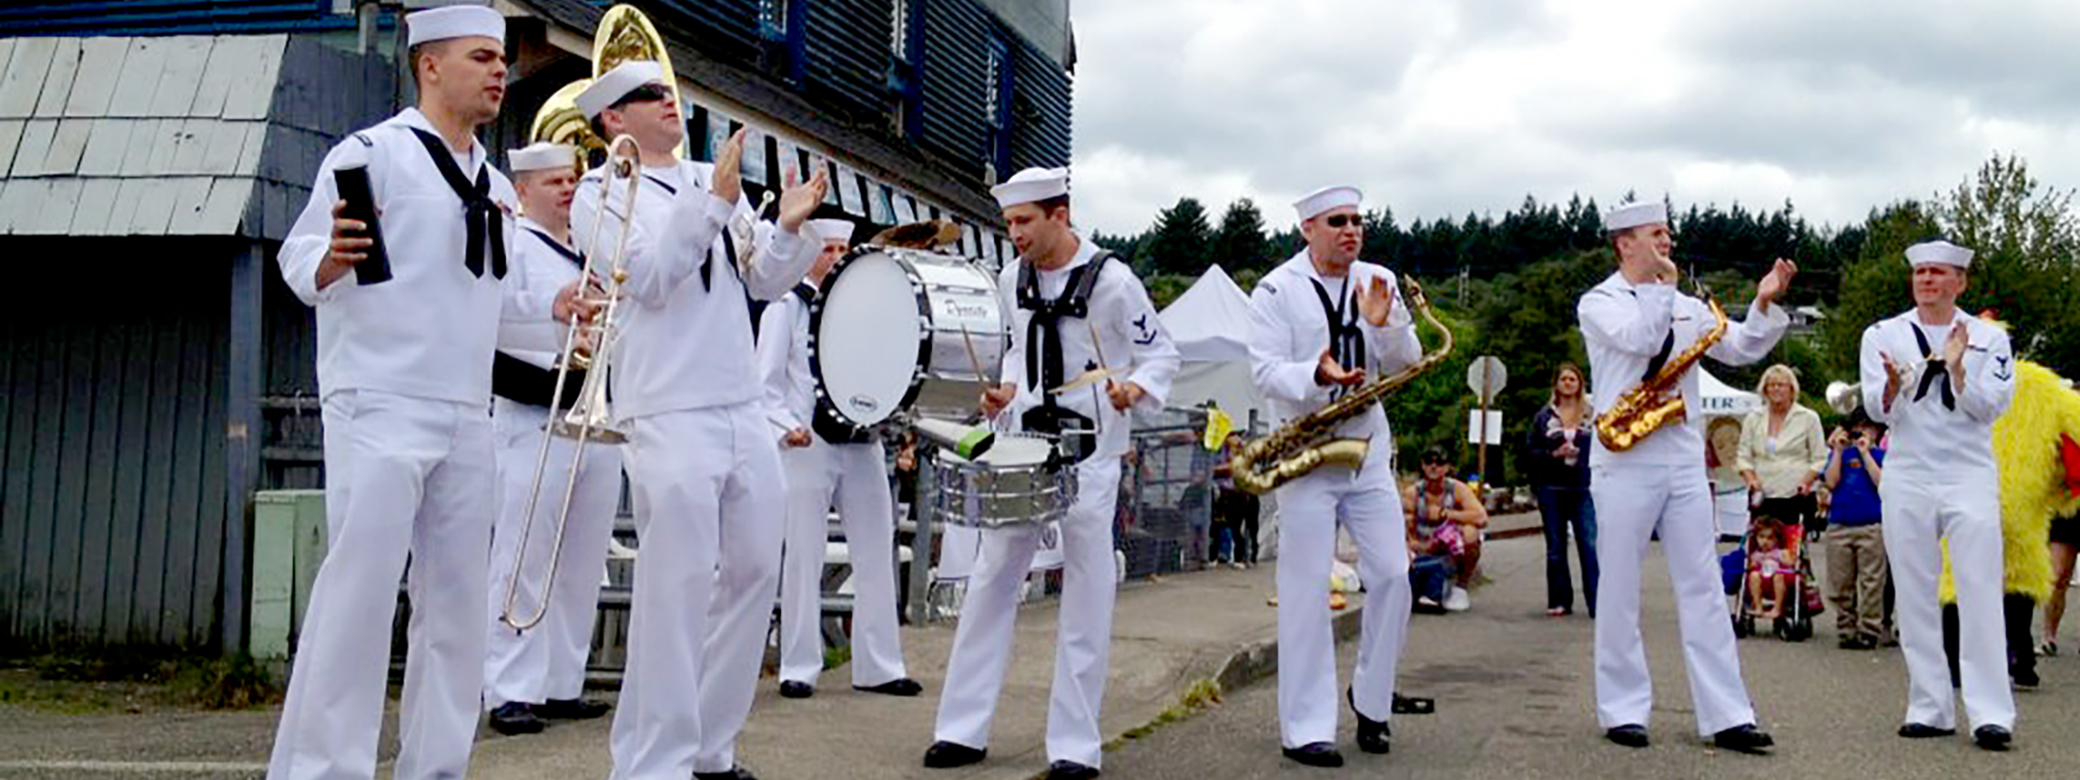 Navy band performing for the public